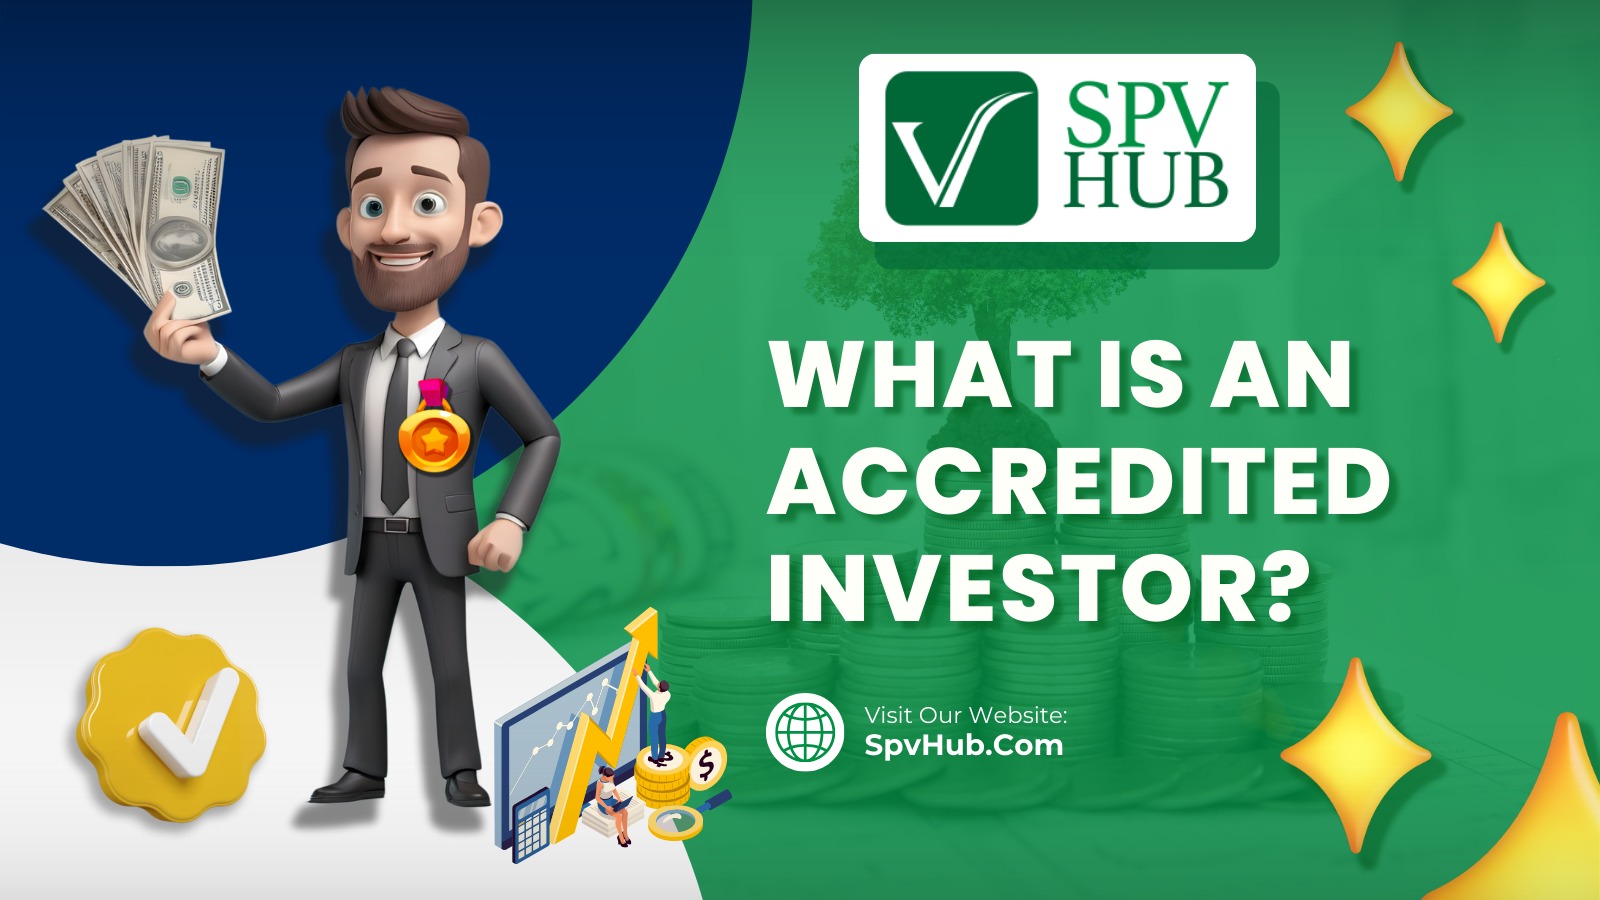 What is an accredited investor?